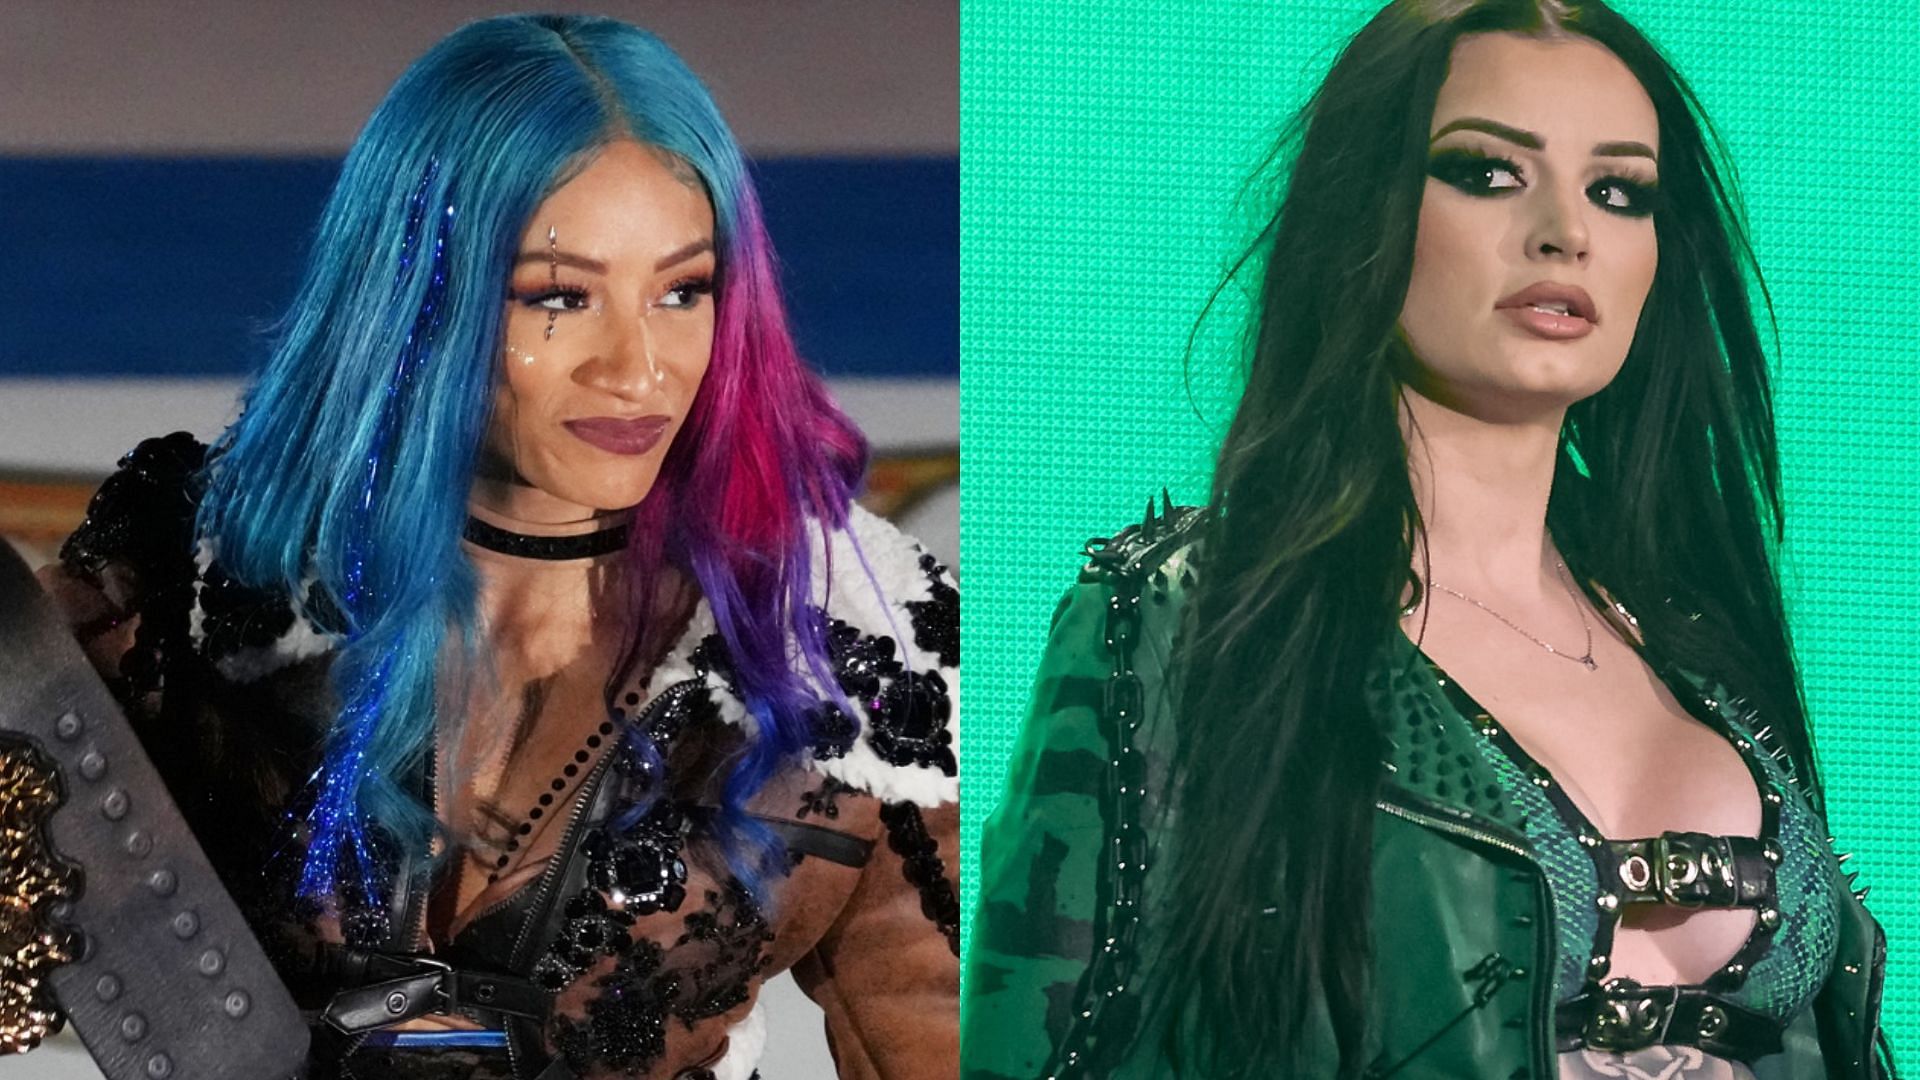 Other than the Anti-Diva, who else could Mercedes Mon&eacute; clash with in AEW?